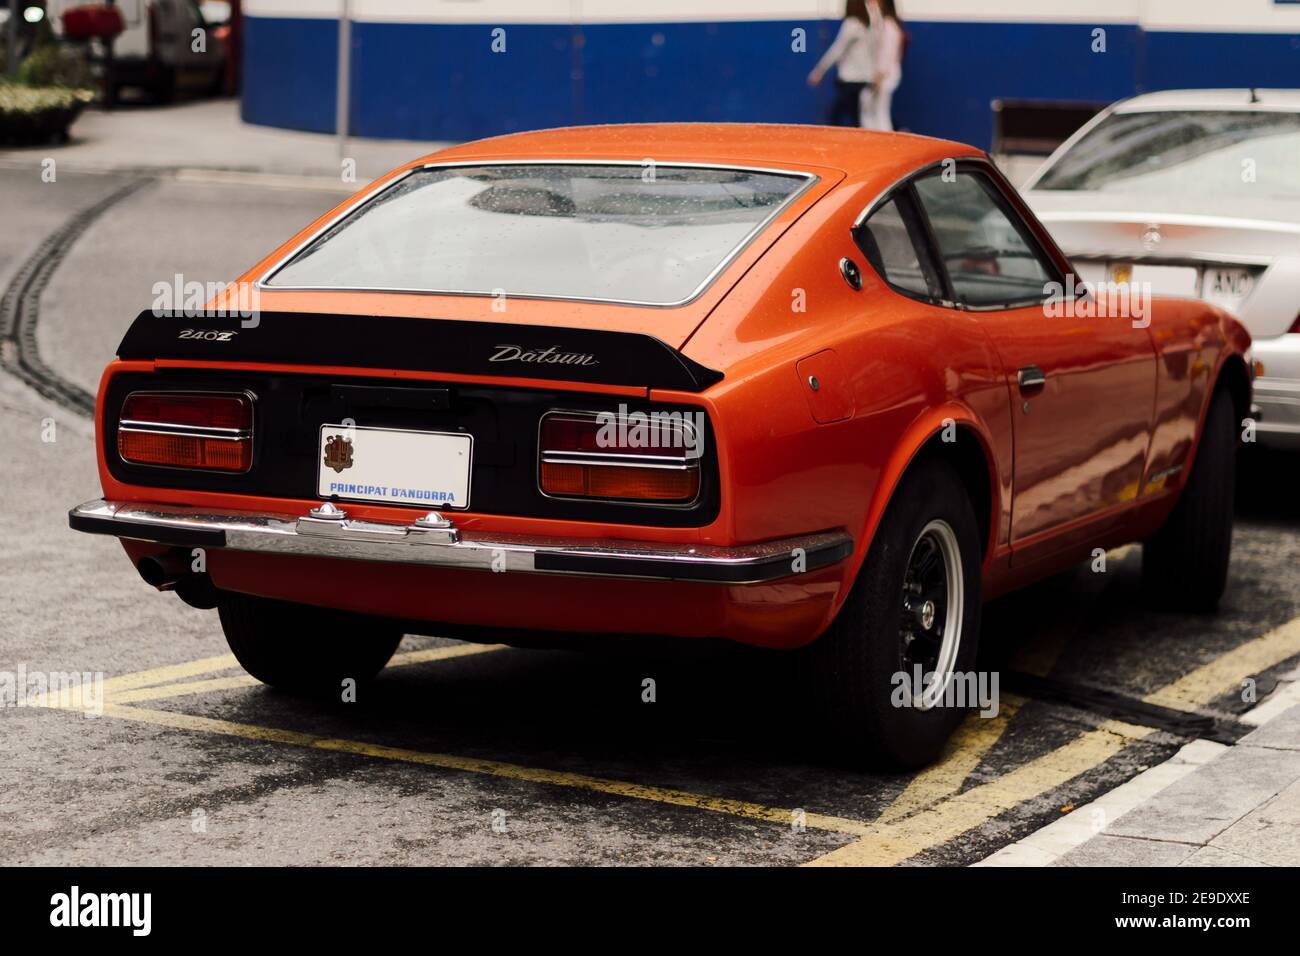 ANDORRA, ANDORRA - Aug 08, 2015: Selective Focus - View of the classic car Datsun 240Z by Nissan, parked in Andorra in a rainy day. Classic sports car Stock Photo